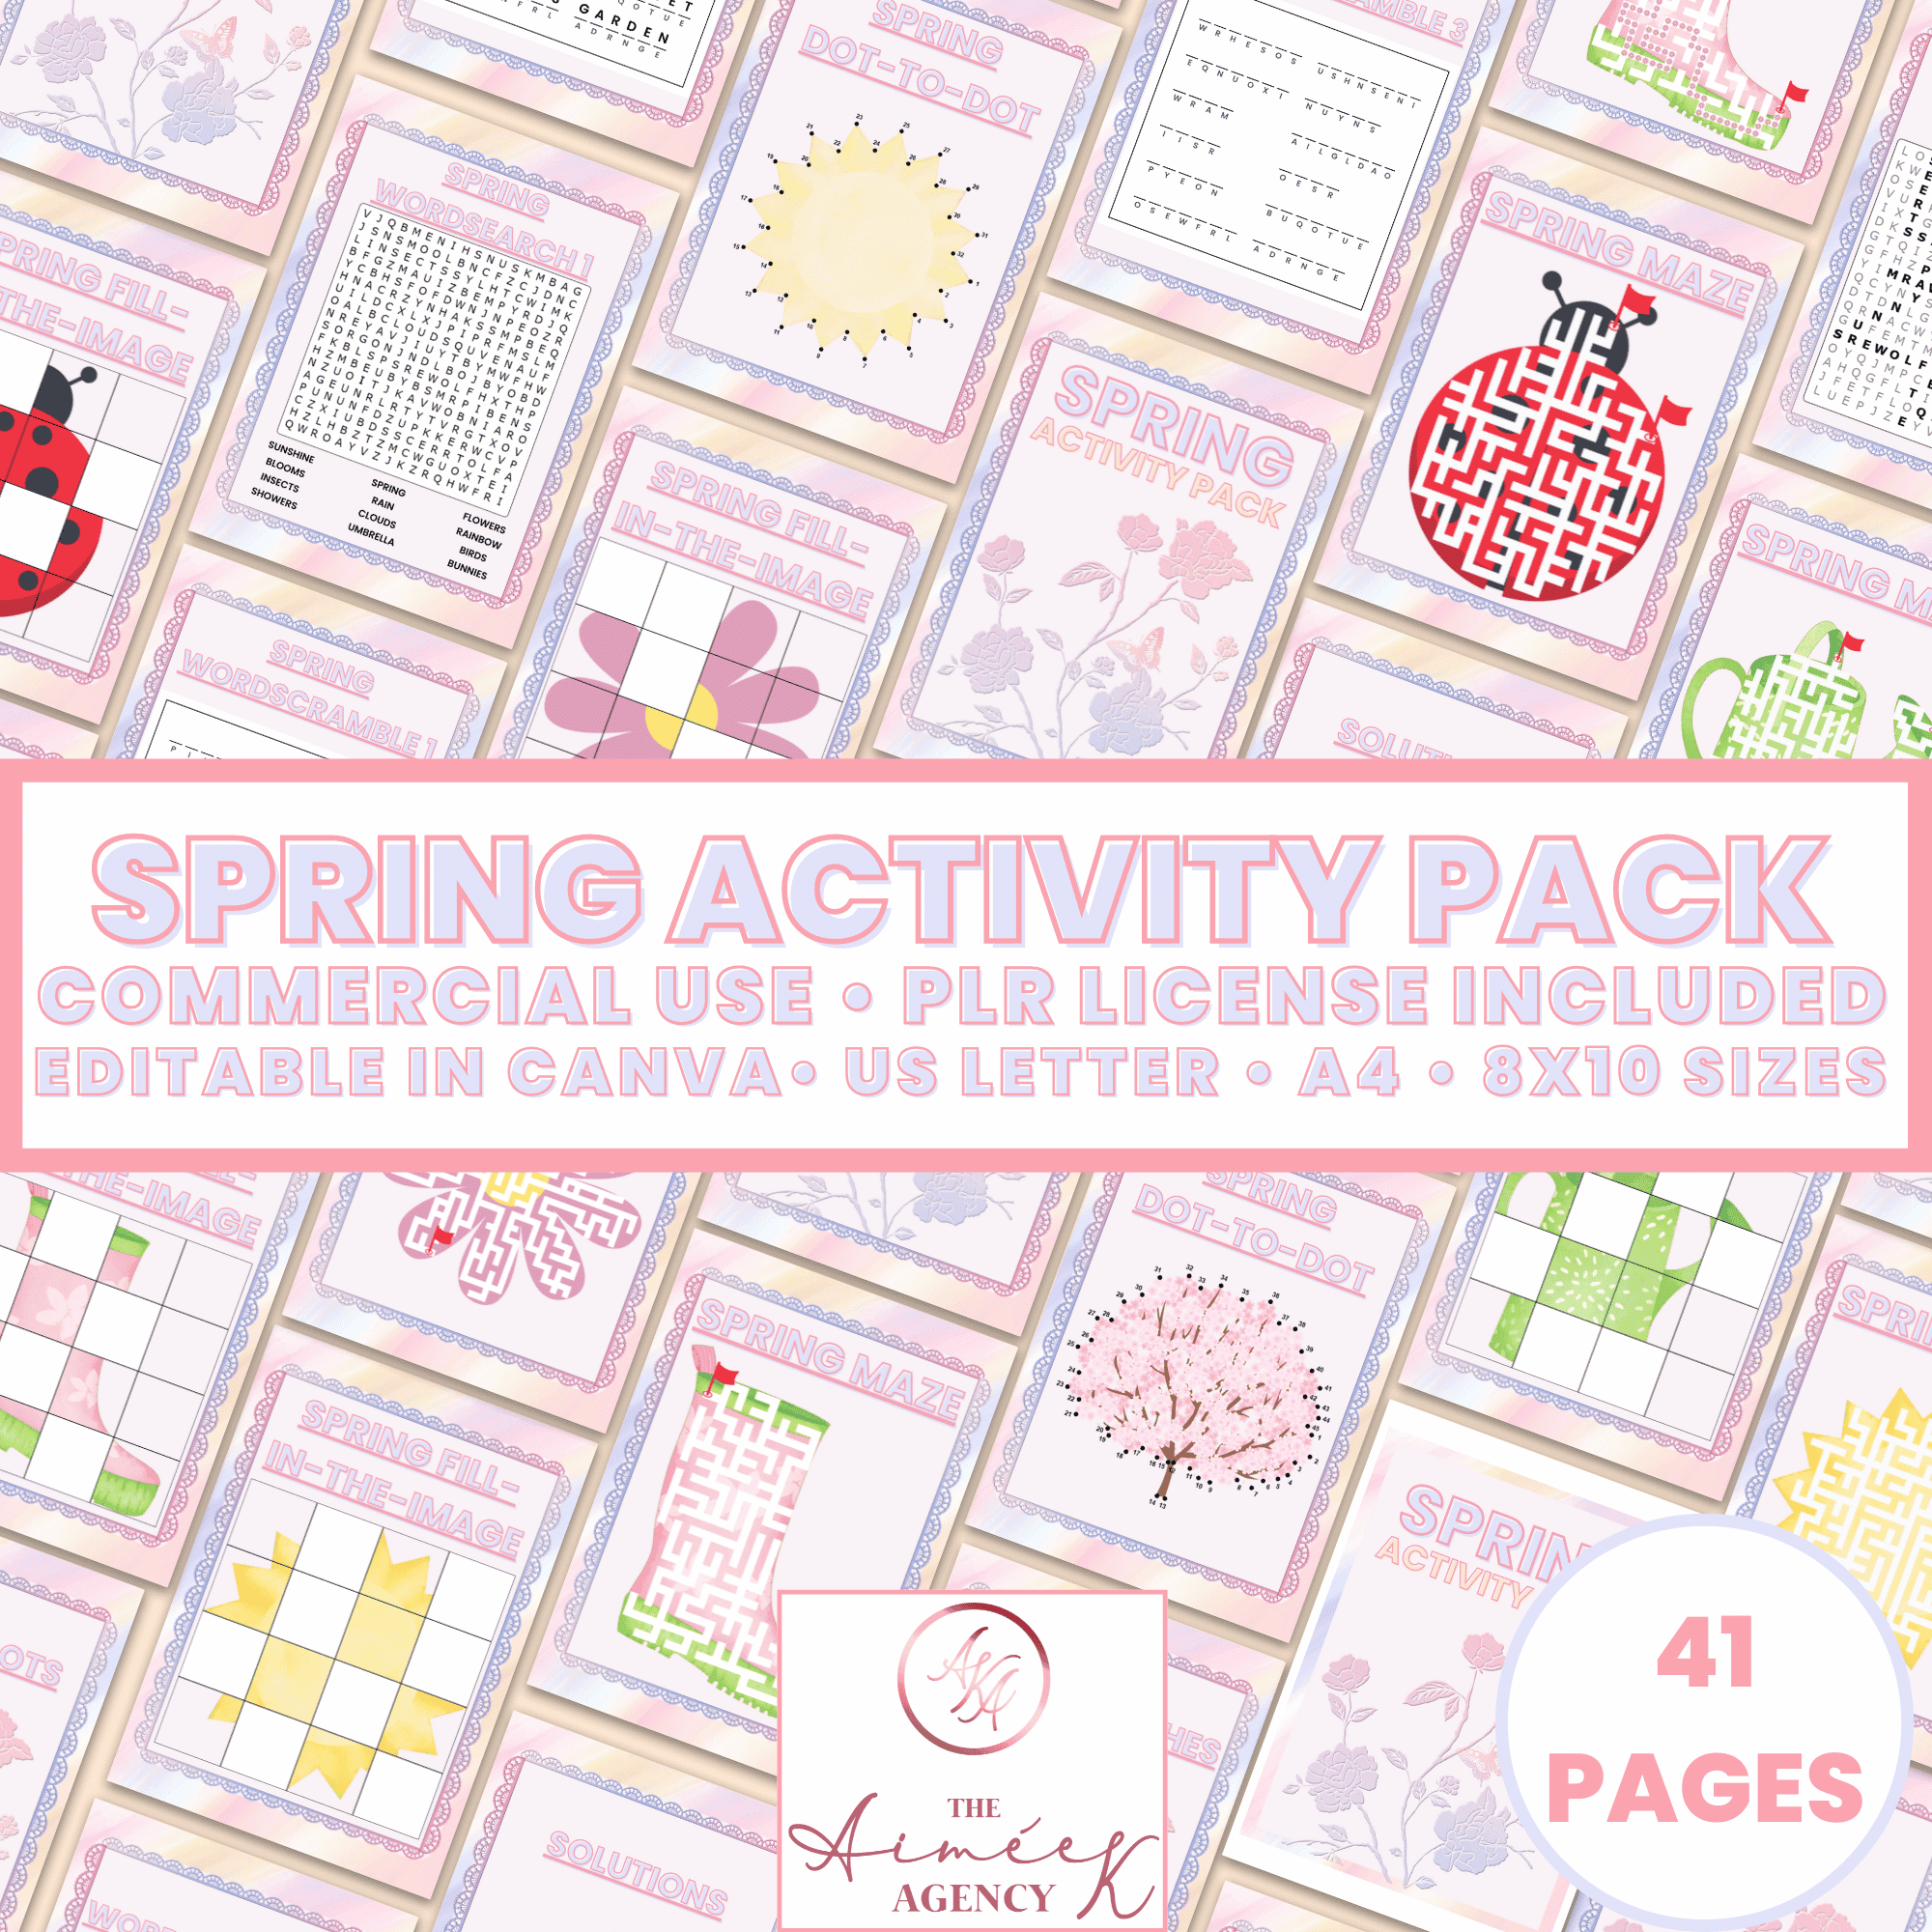 Spring Activity Pack with commercial use and PLR license included. Editable in Canva, available in US Letter, A4, and 8x10 sizes. 41 pages featuring various spring-themed activities.